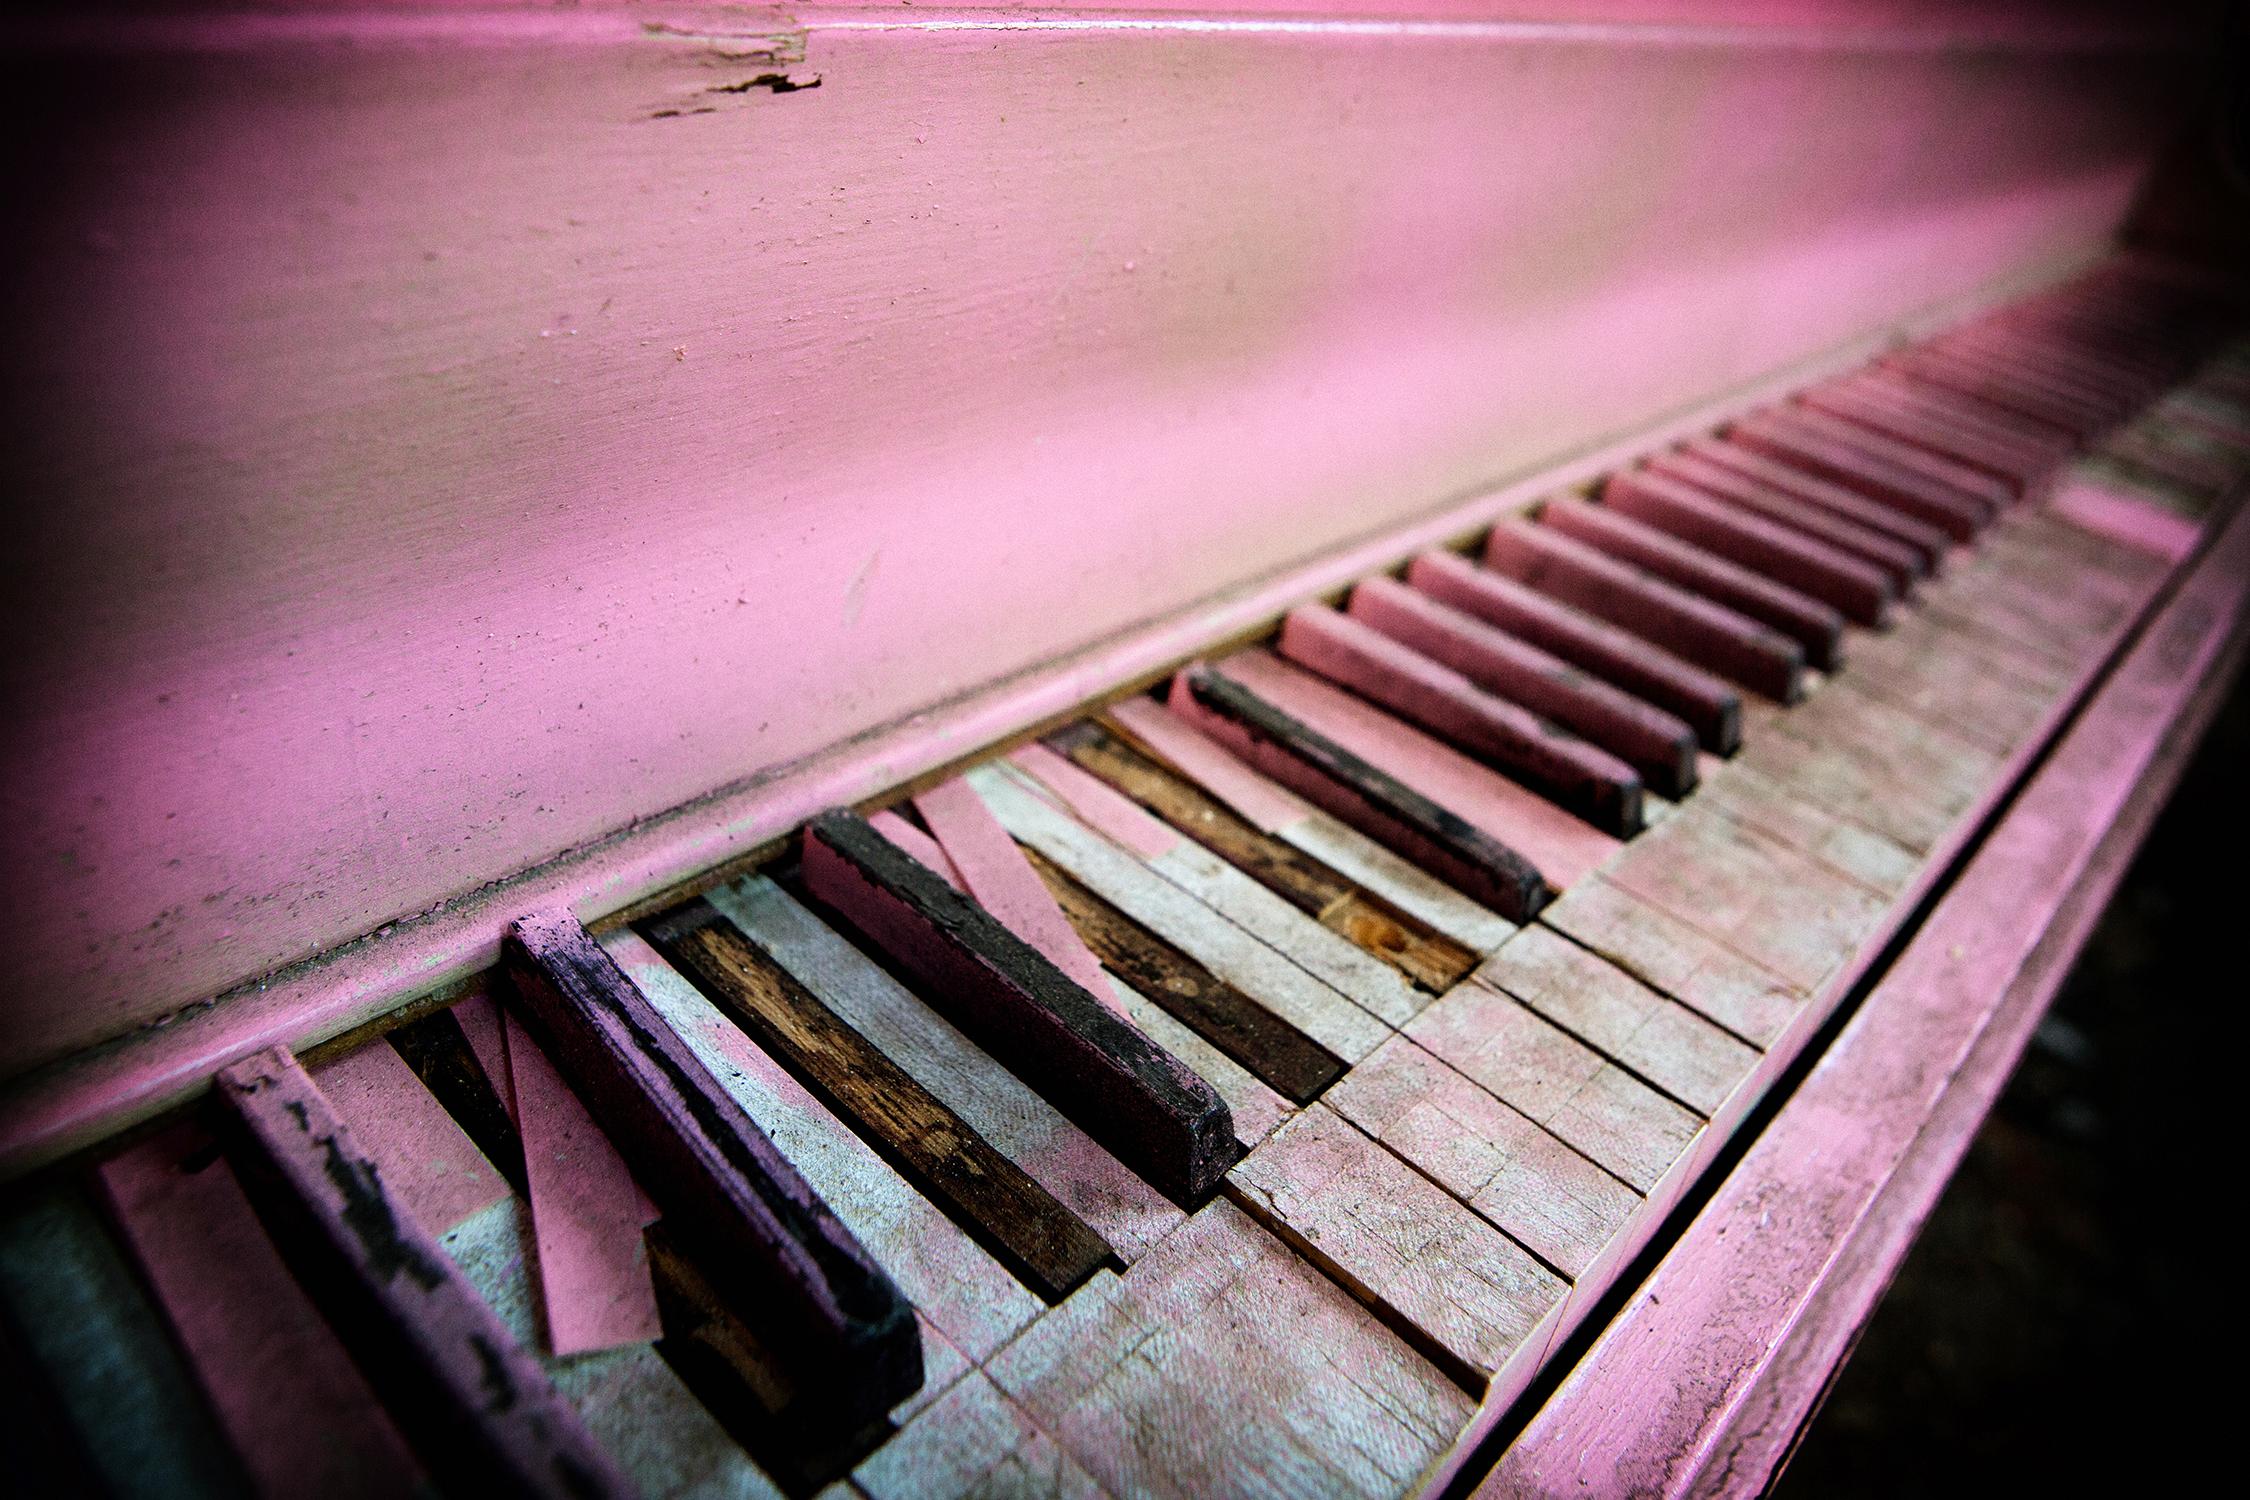 Rebecca Skinner Color Photograph - "Pink Piano II", contemporary, abandoned, Indiana, music, color photograph